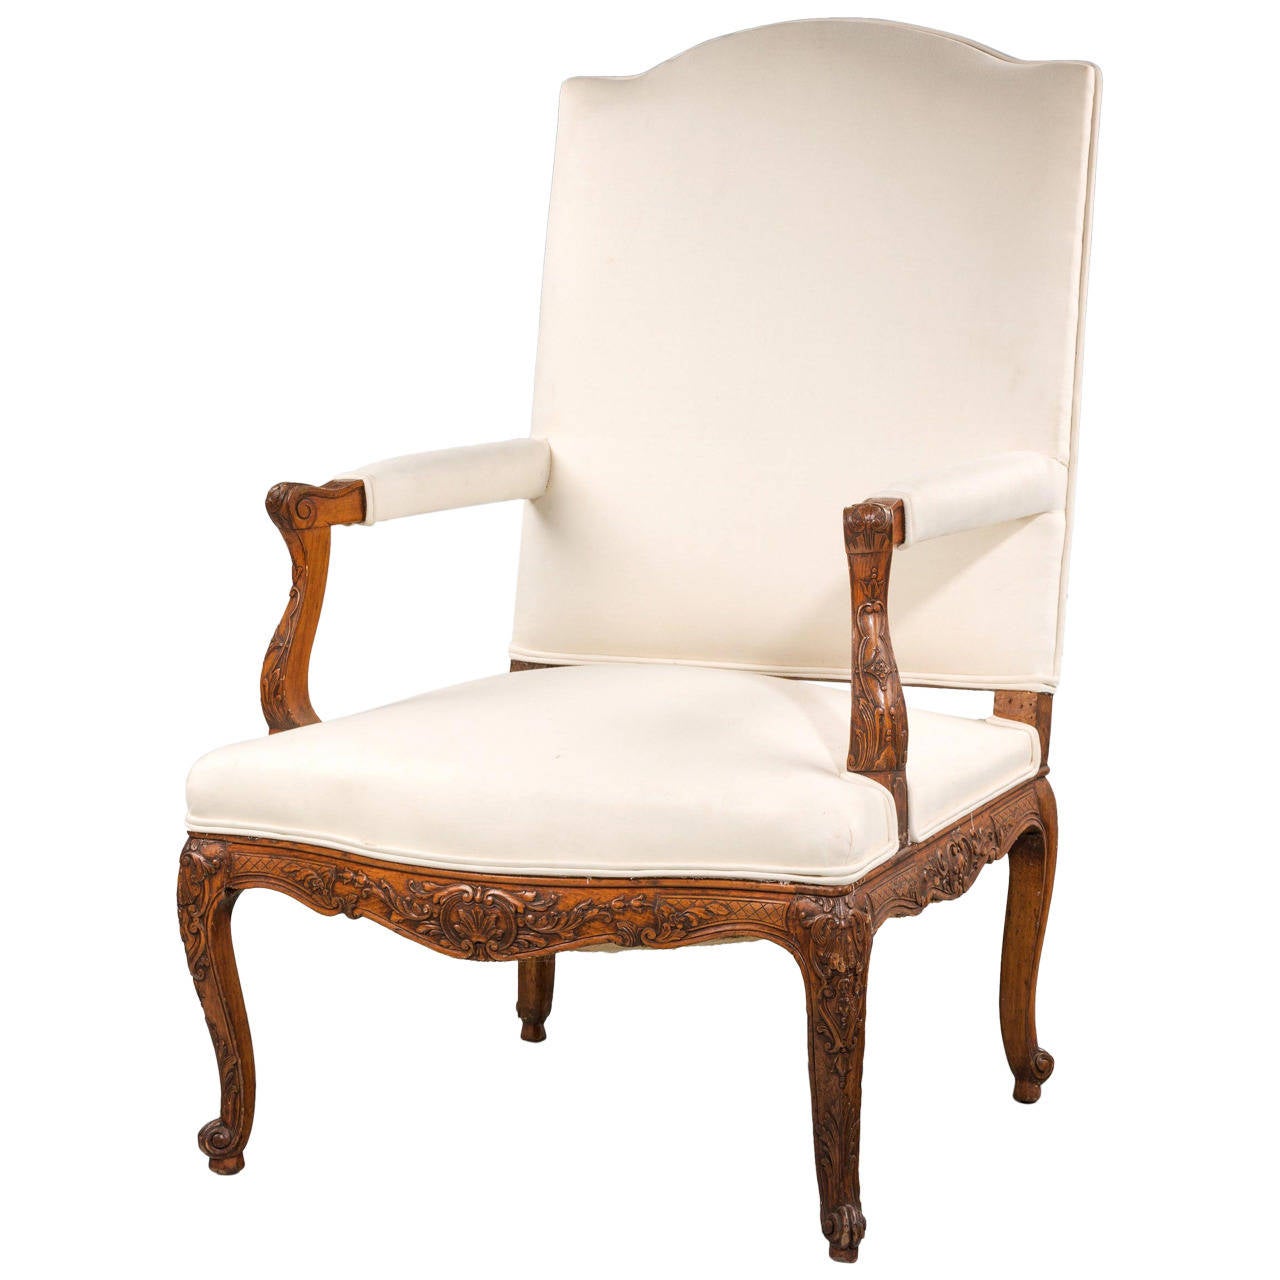 Louis XIV Design Armchair For Sale at 1stdibs